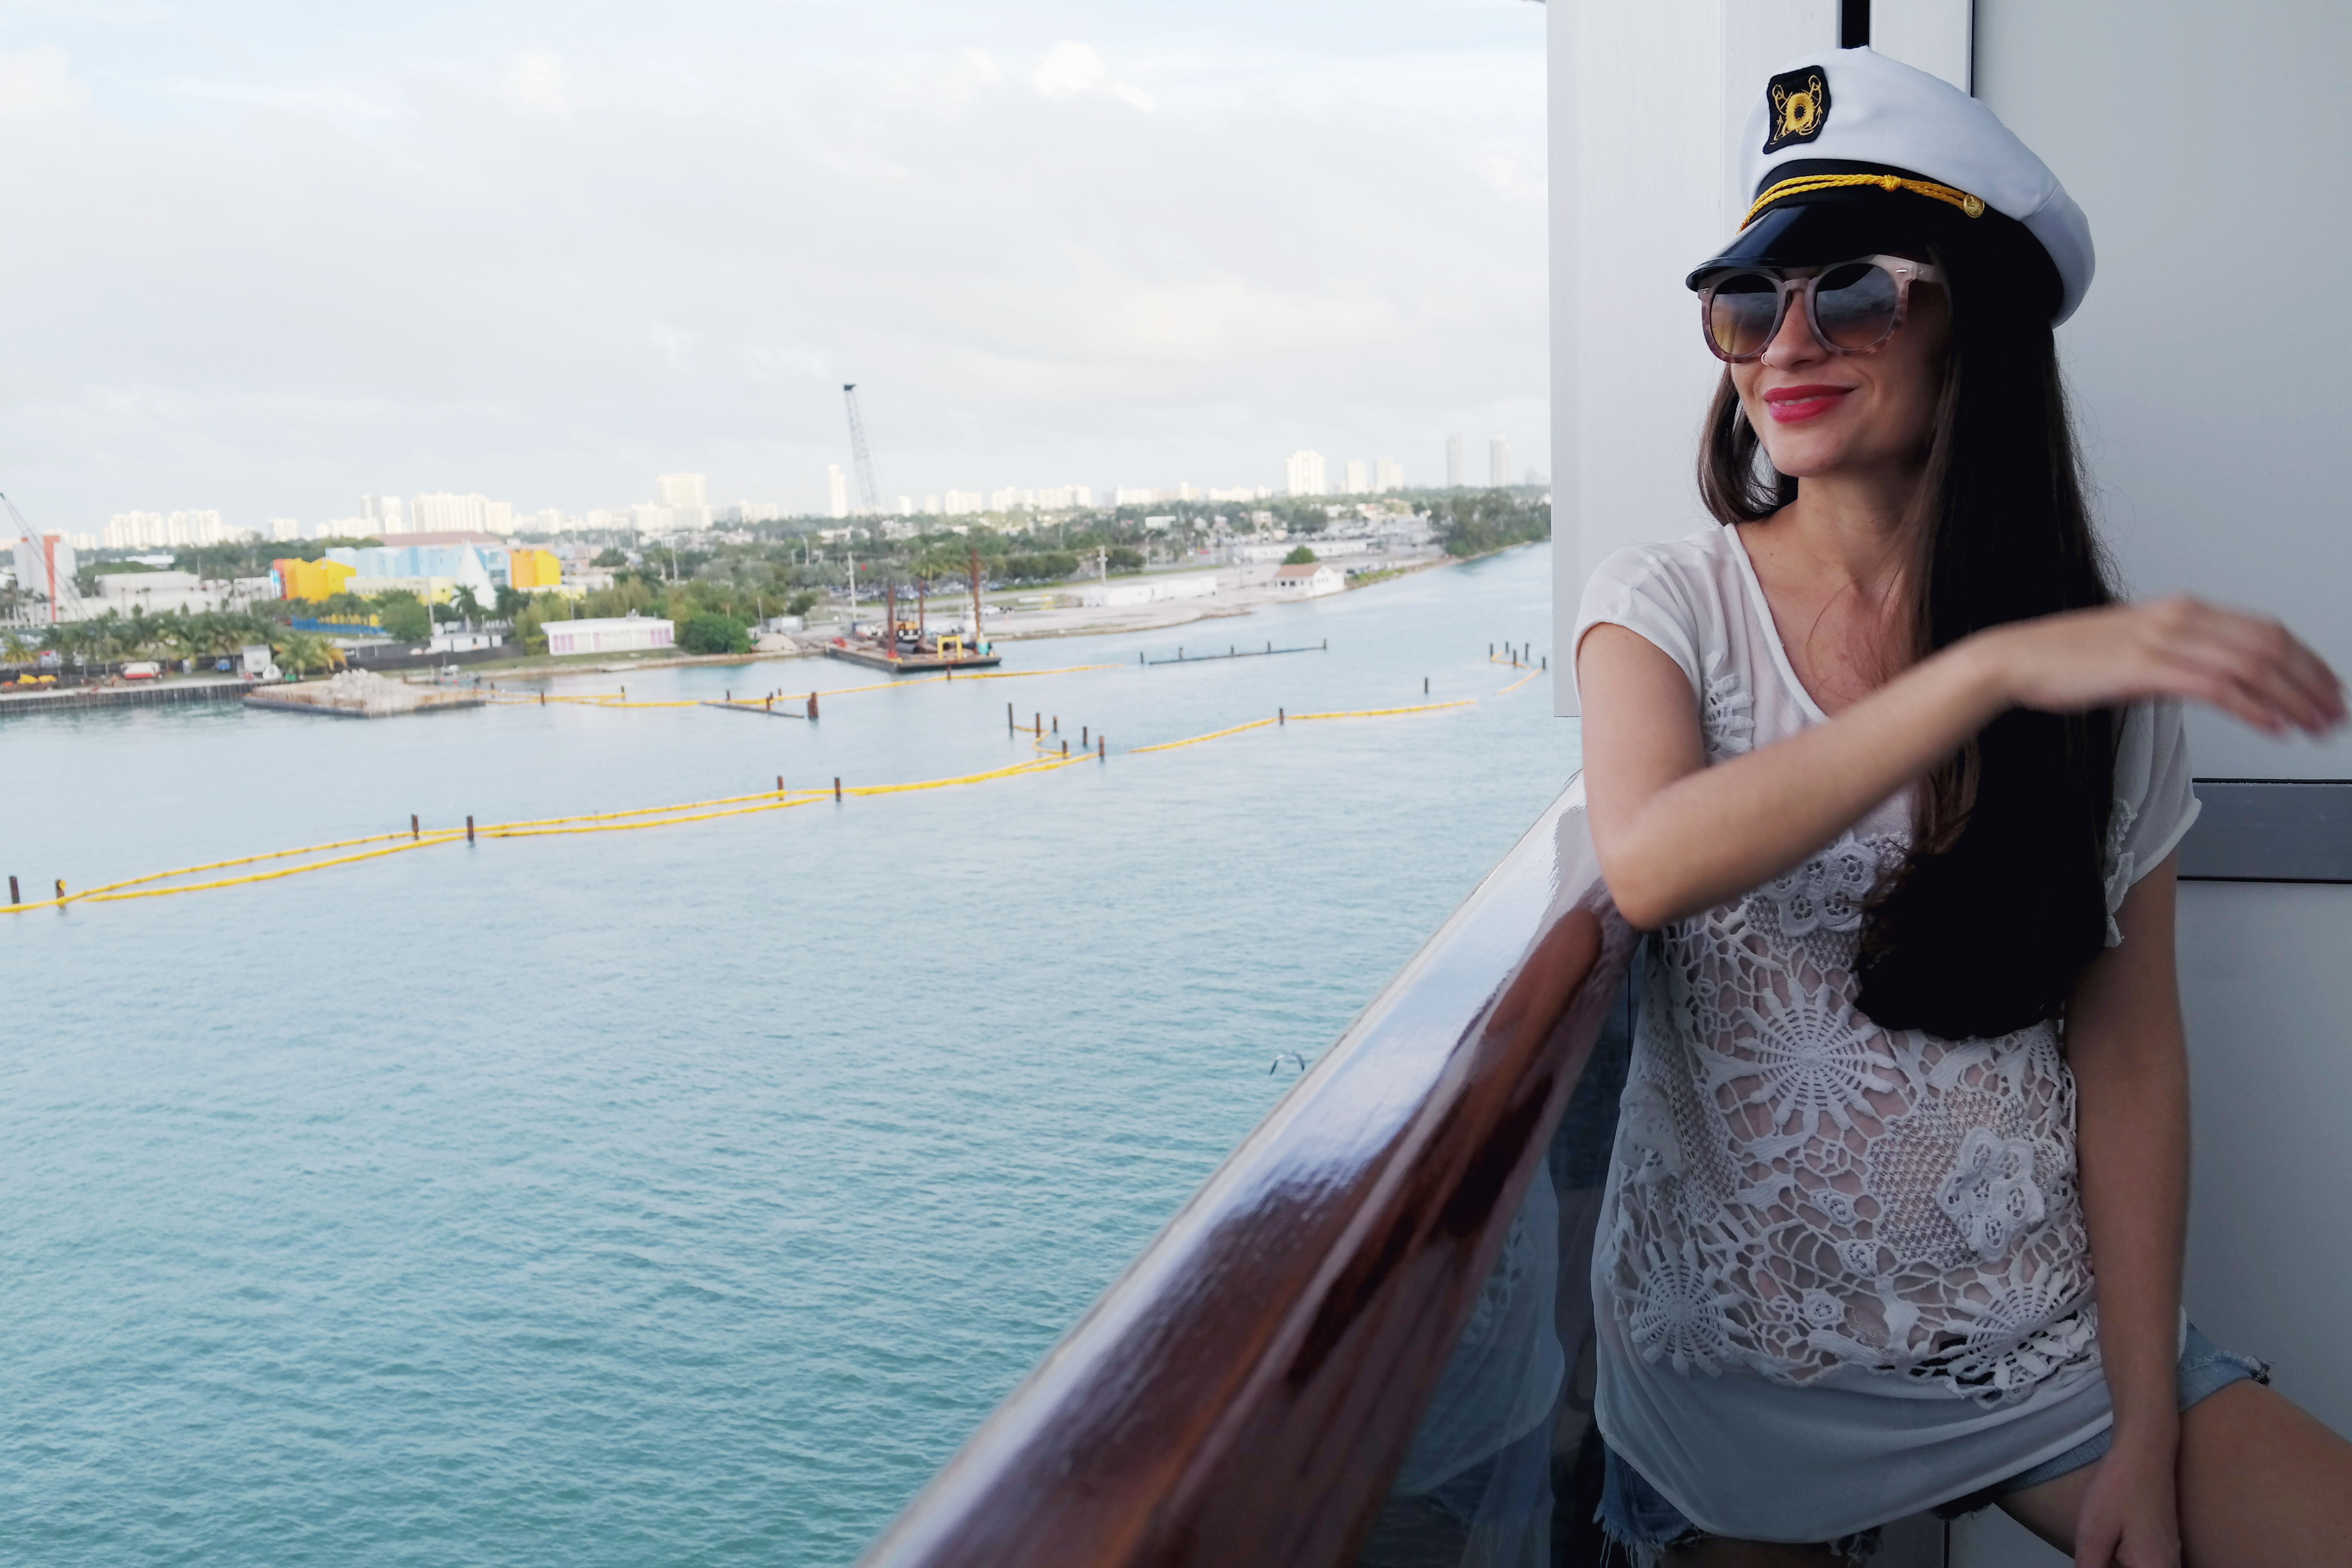 A Girls Trip on the Carnival Cruise